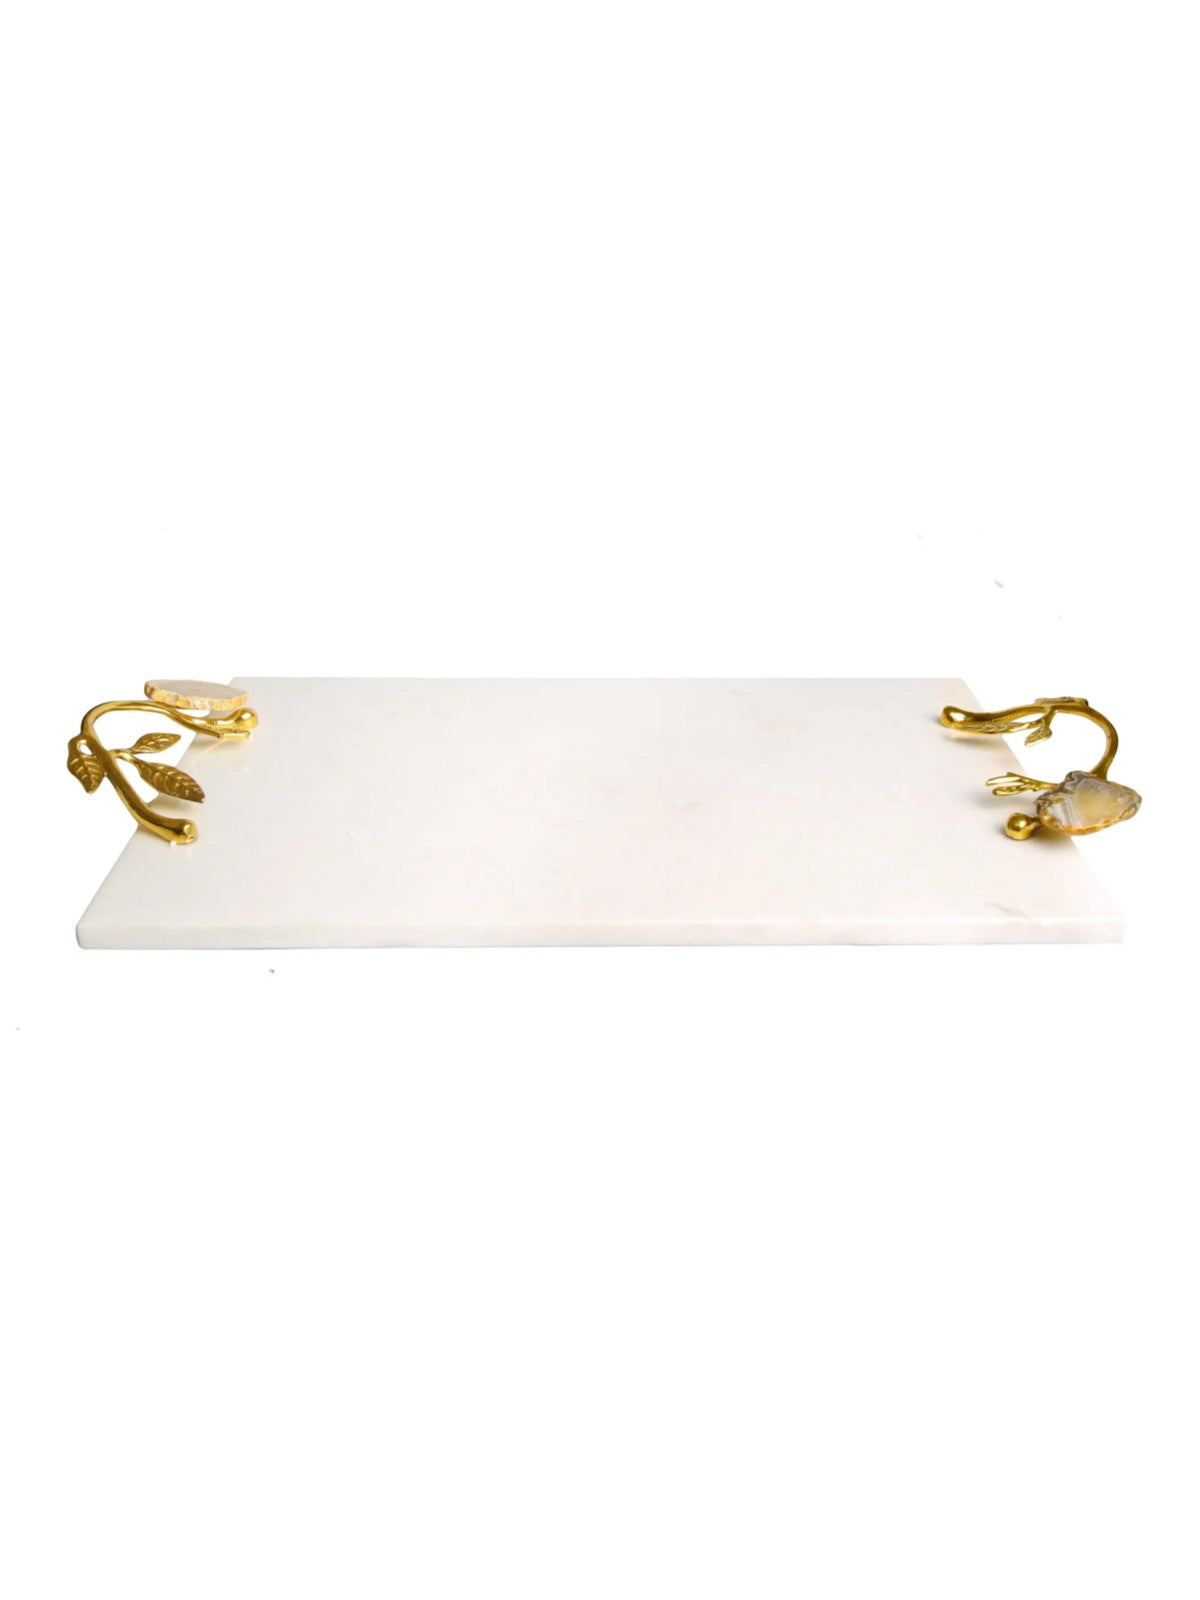 White Marble Decorative Tray with Luxurious Agate Stone Handles, 16L x 9W. Sold by KYA Home Decor. 